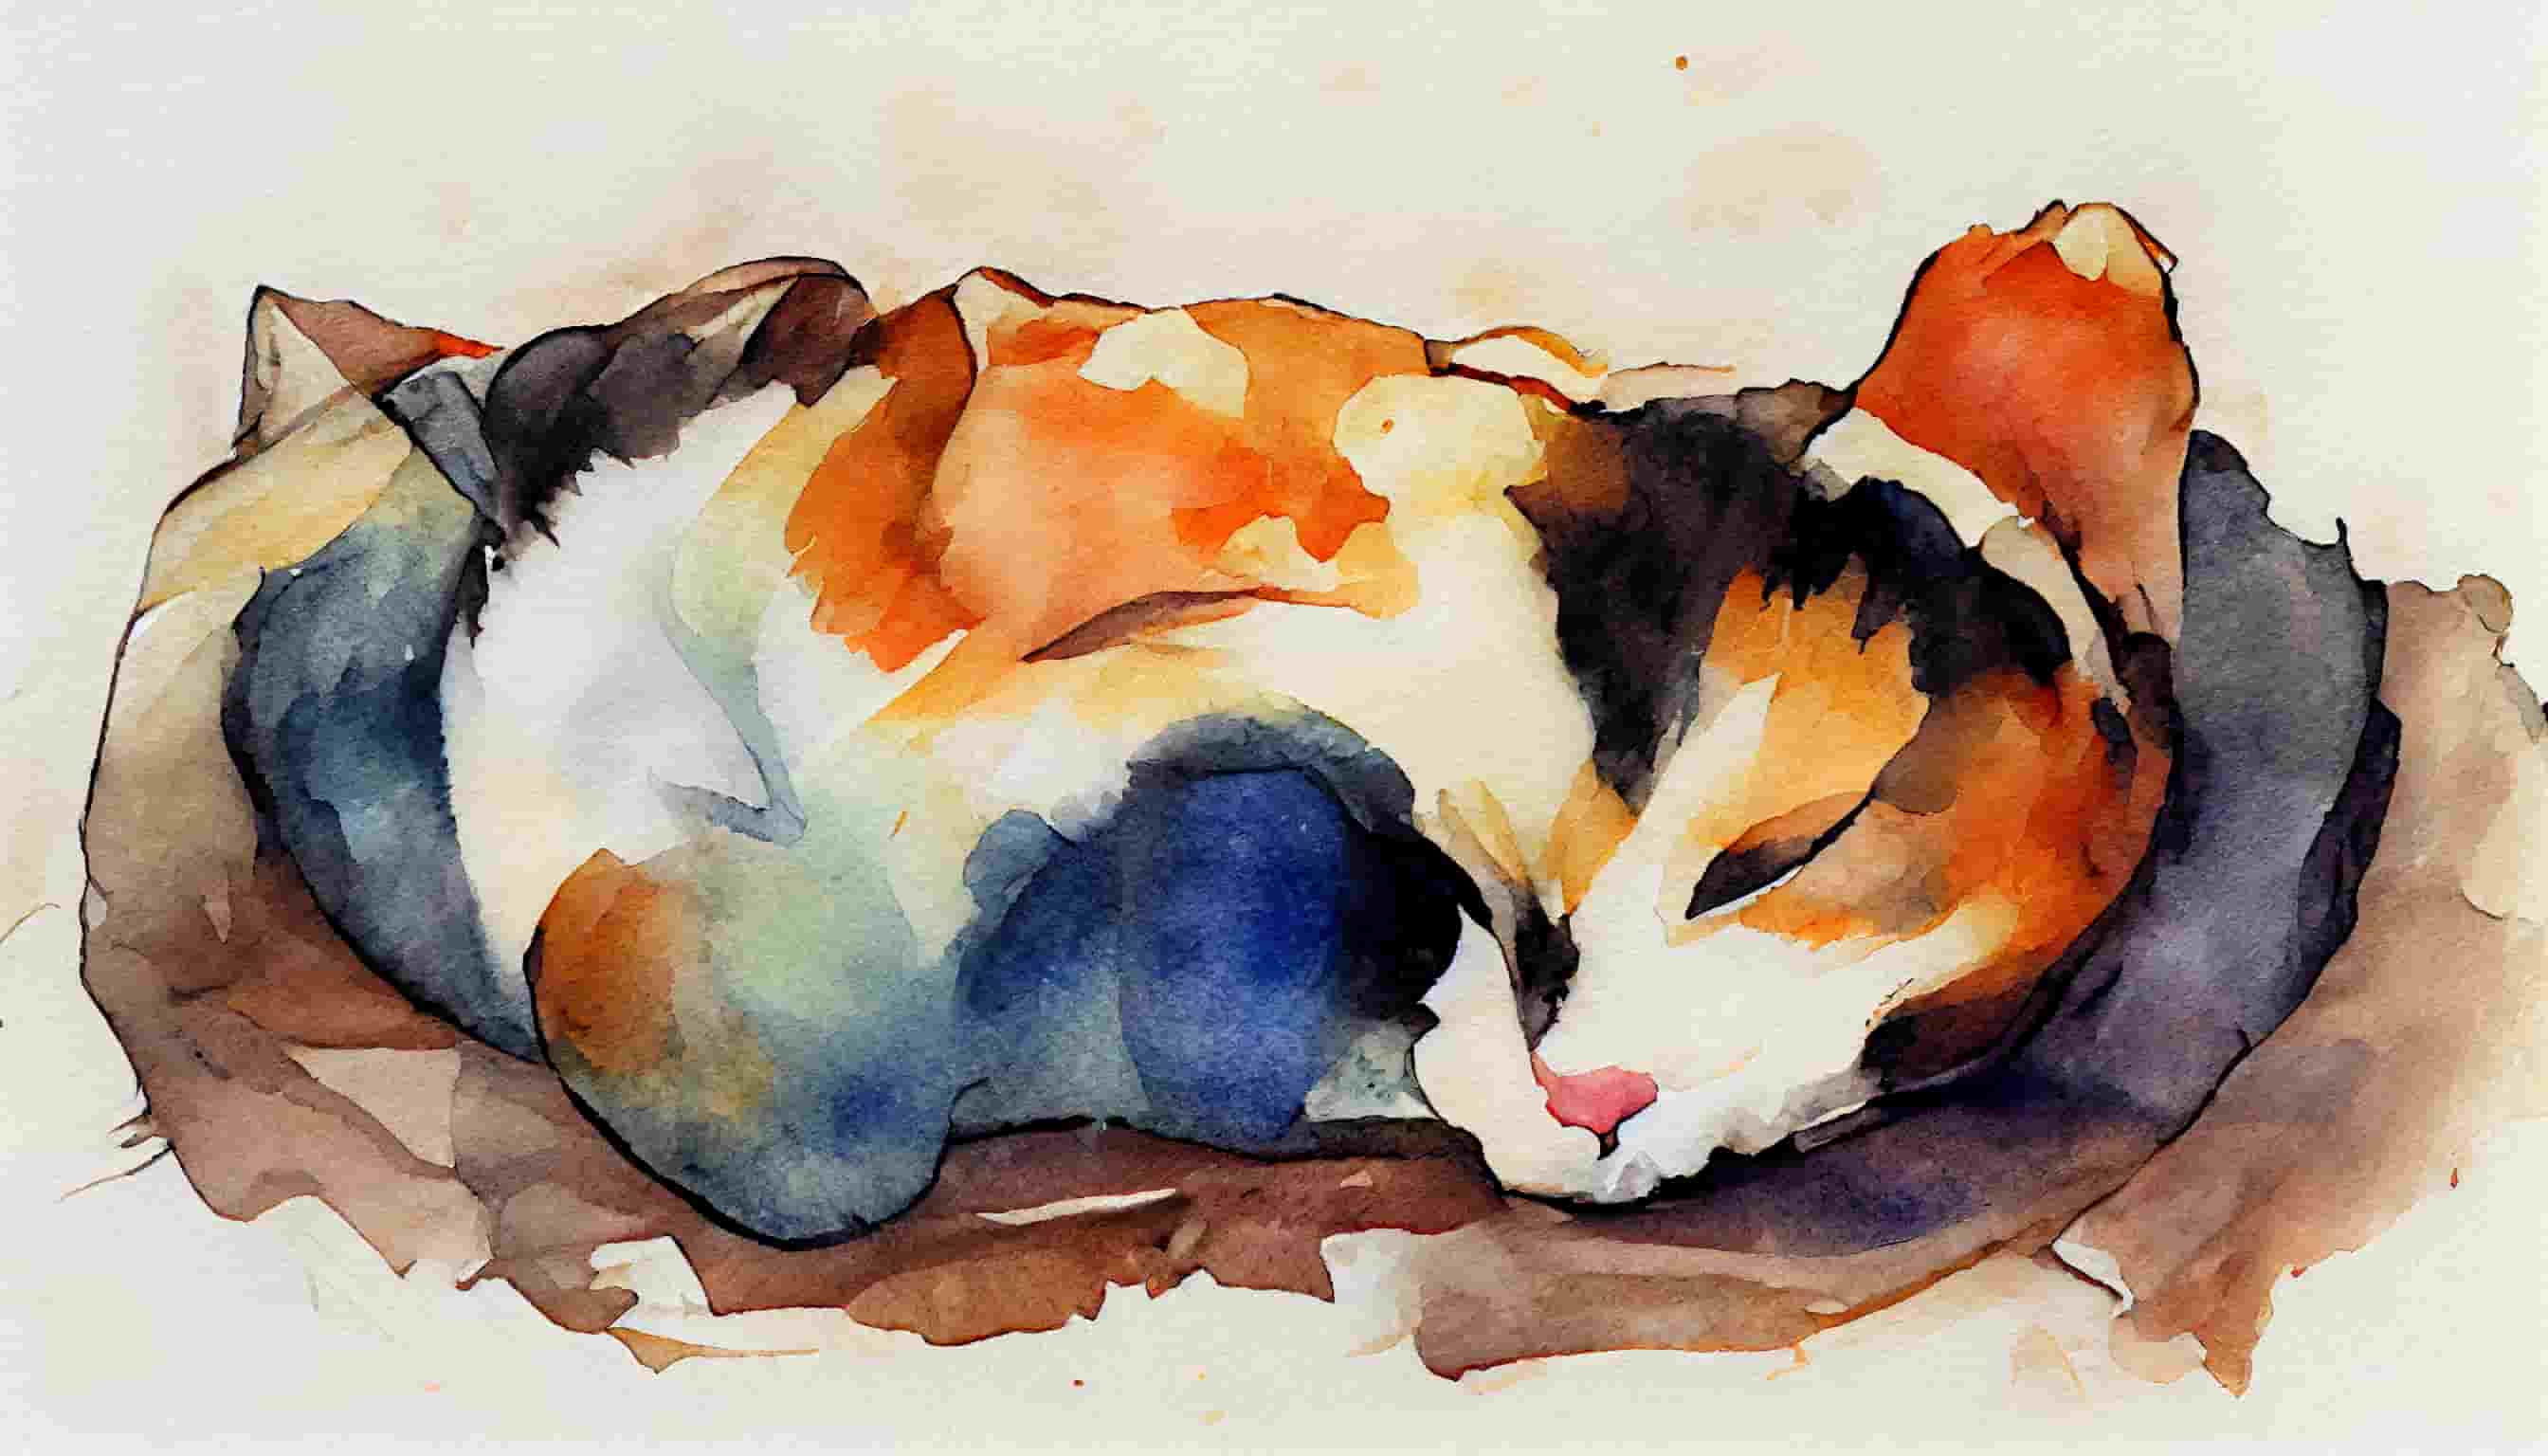 watercolor a calico cat curled up and sleeping on a bed